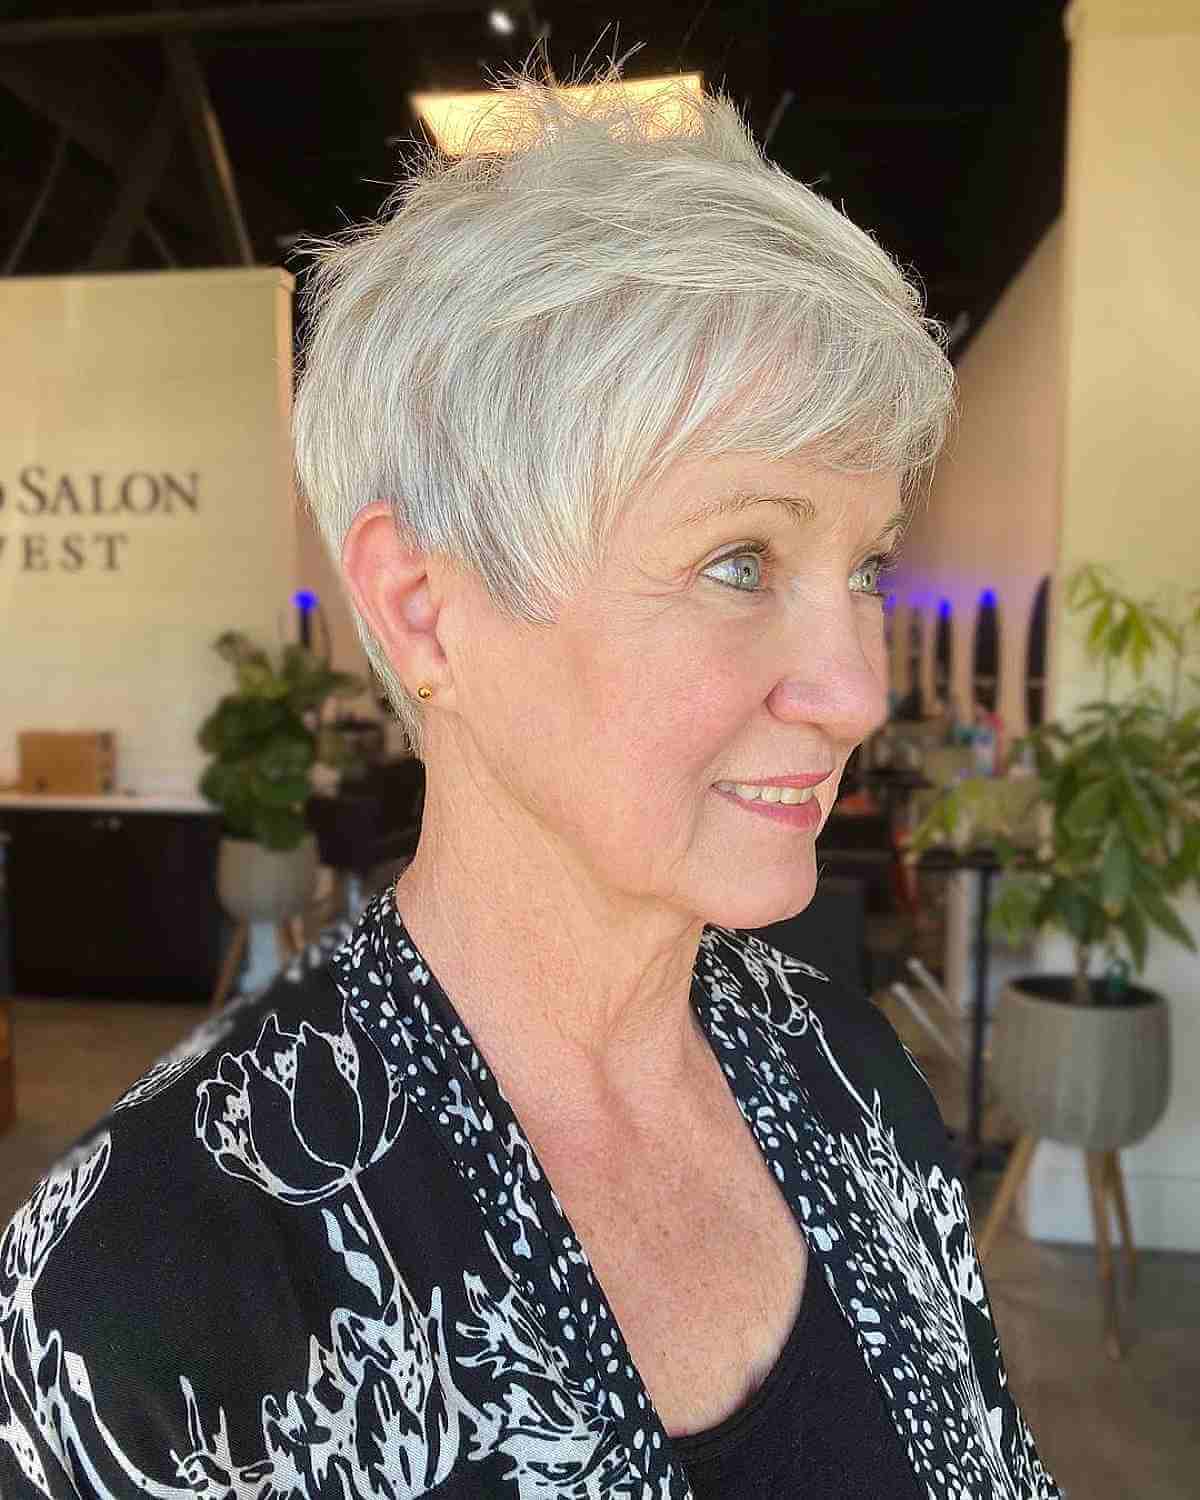 The Angelic White Pixie Cut and Color